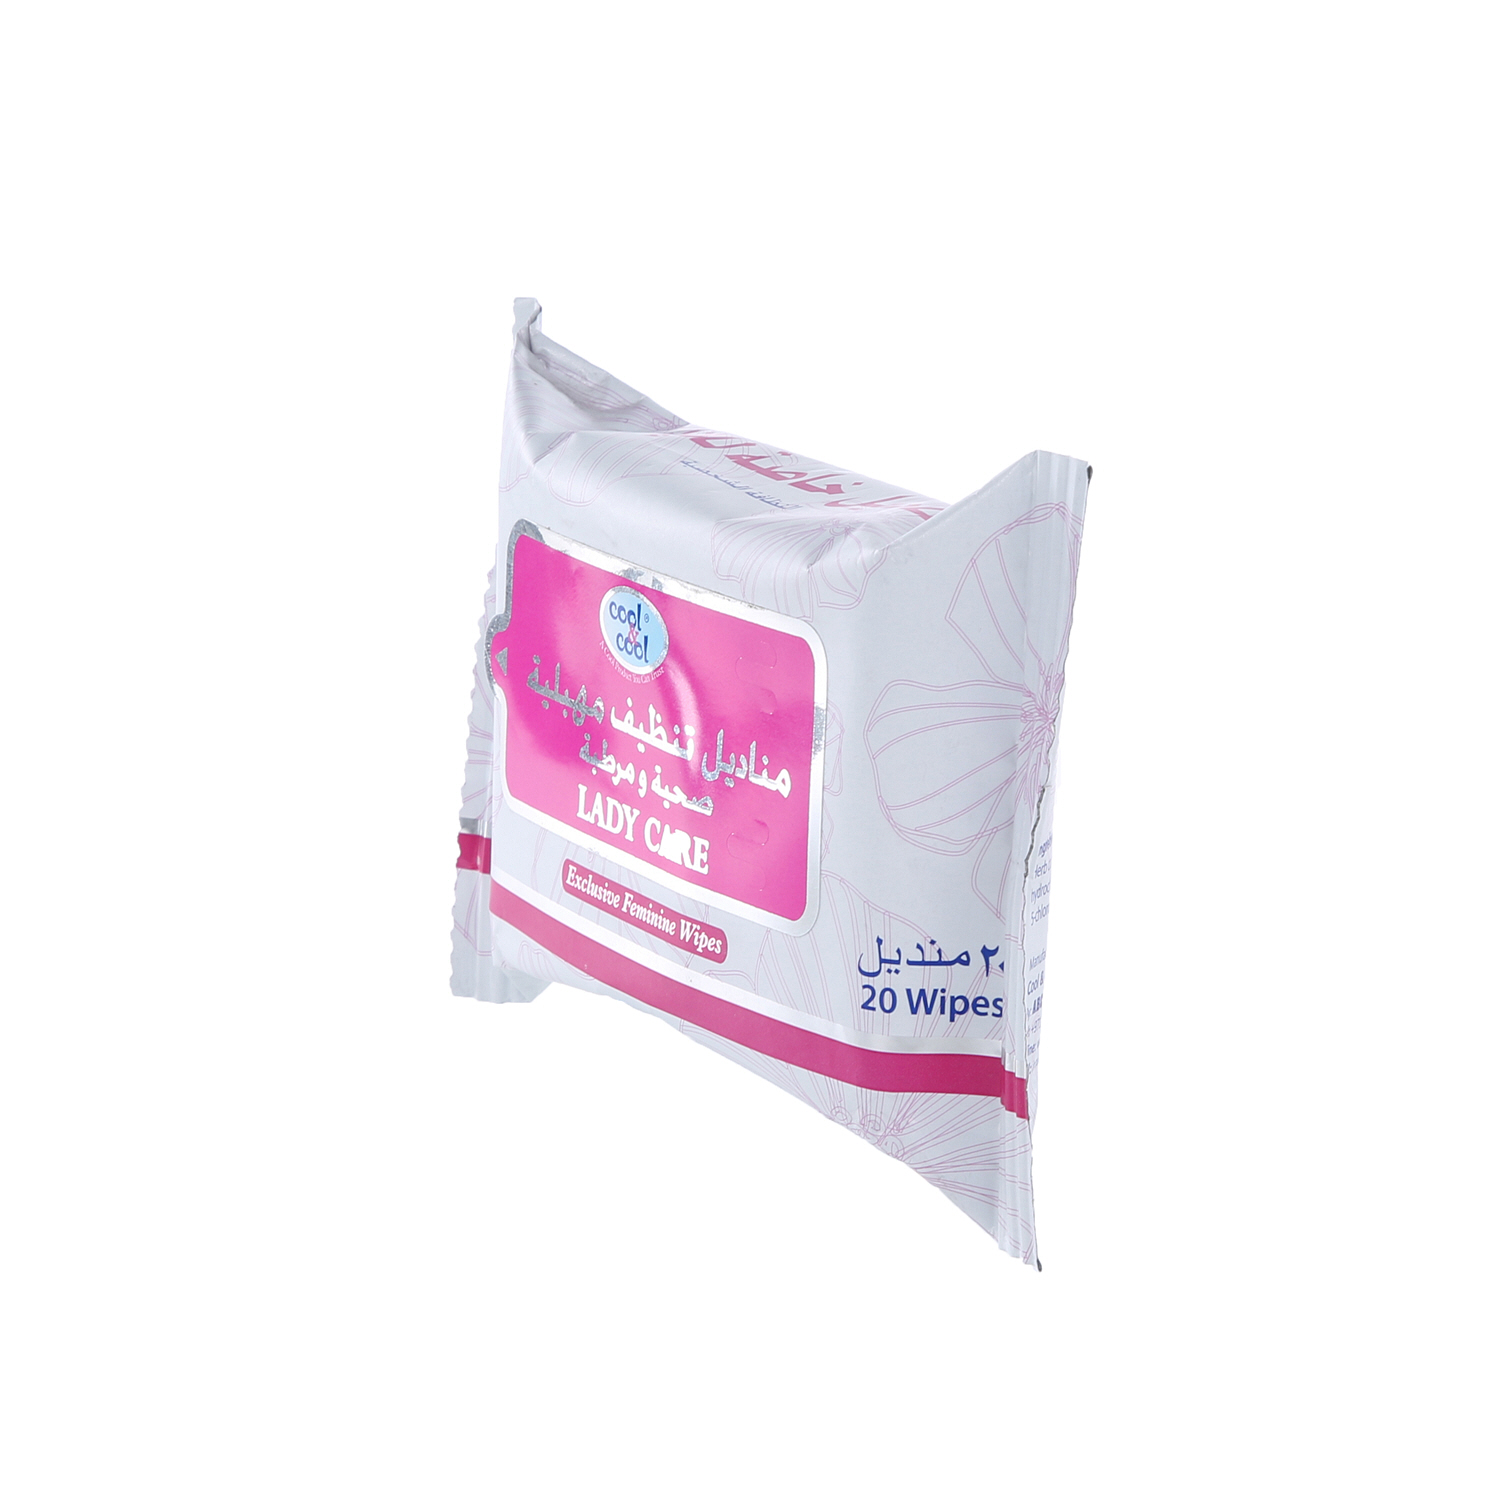 Cool&Cool Lady Care Wipes 20Wipes